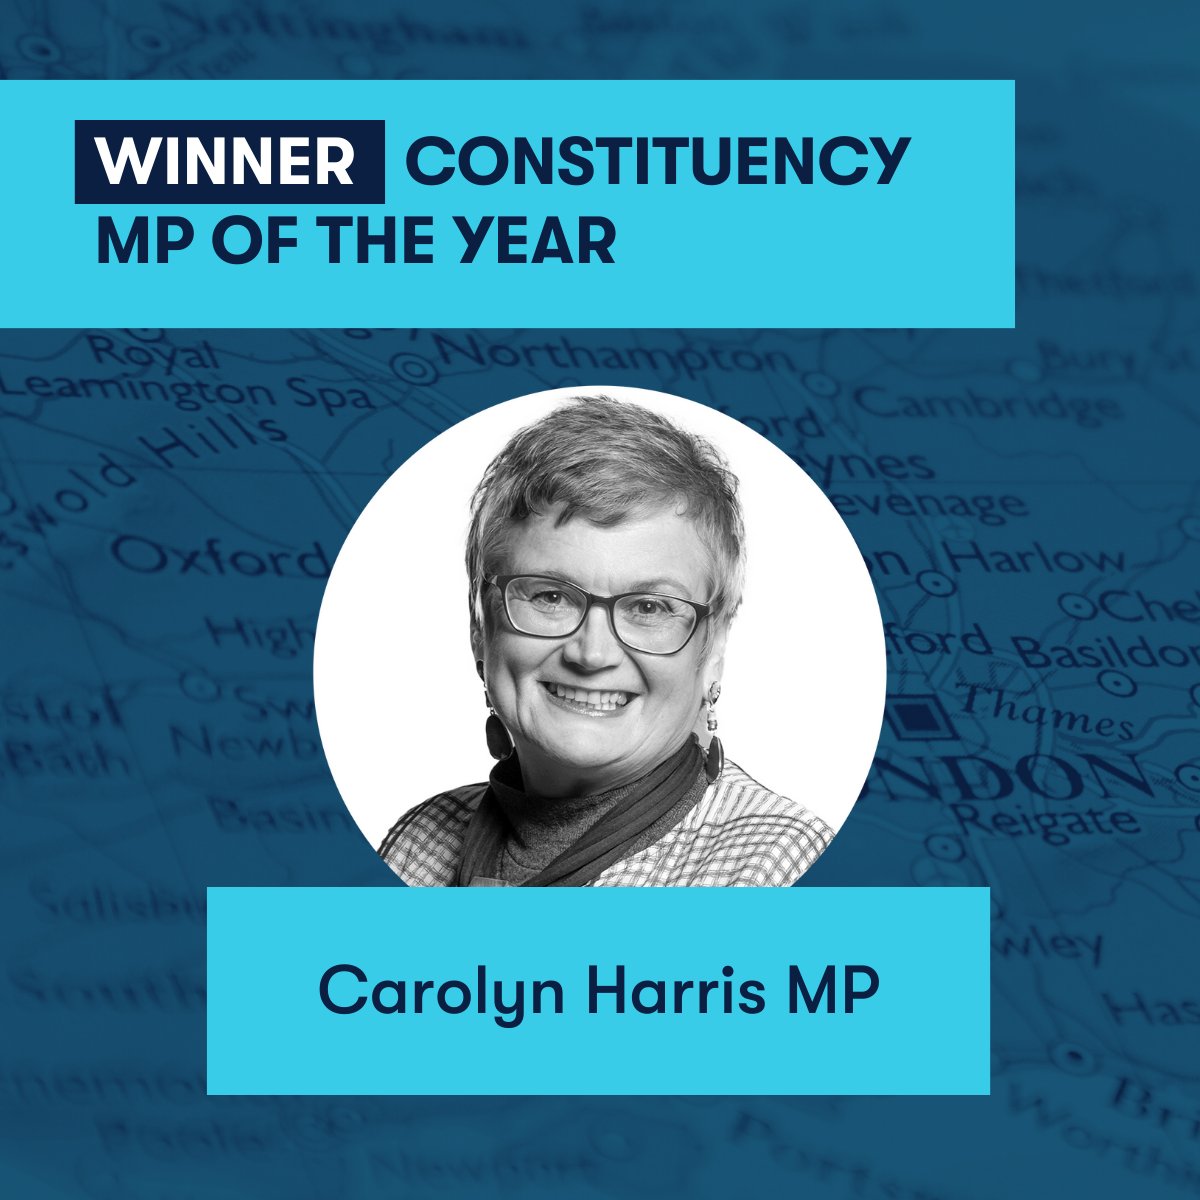 The winner of ‘Constituency MP of the Year’ is Carolyn Harris! Awarded for her ‘Everyone Deserves a Christmas’ campaign which saw 2,000 hampers delivered to households in Swansea. Massive congratulations, @carolynharris24! #PagefieldParliamentarianAwards